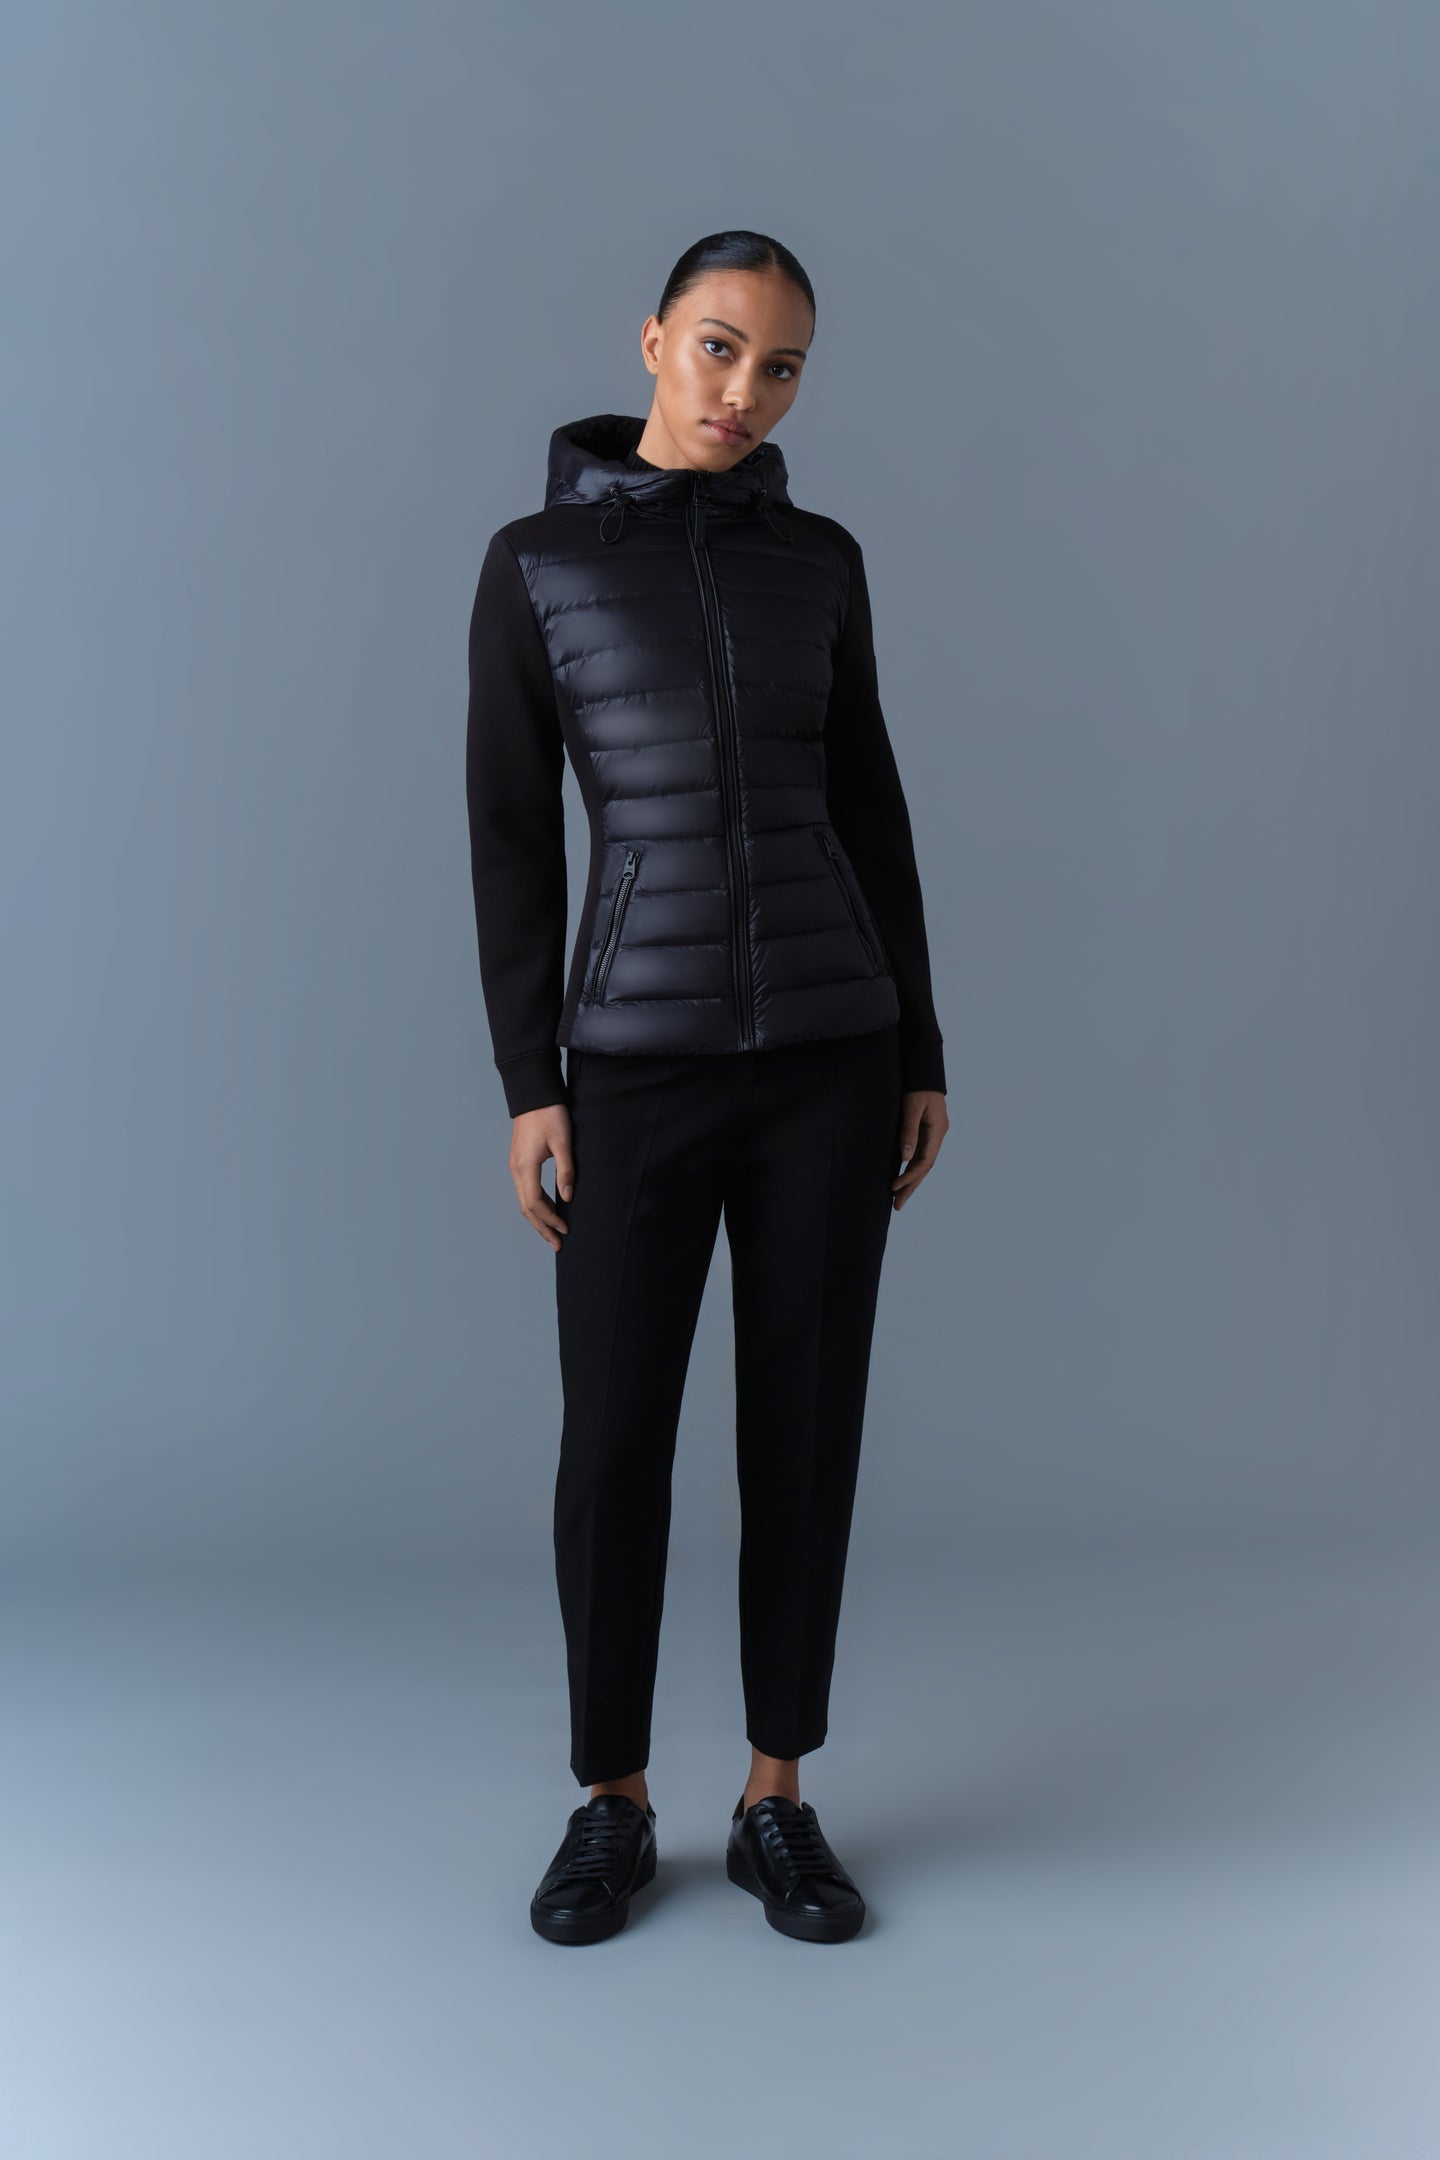 Does anyone have experience with the Reversible Crossover Sweater? : r/ lululemon